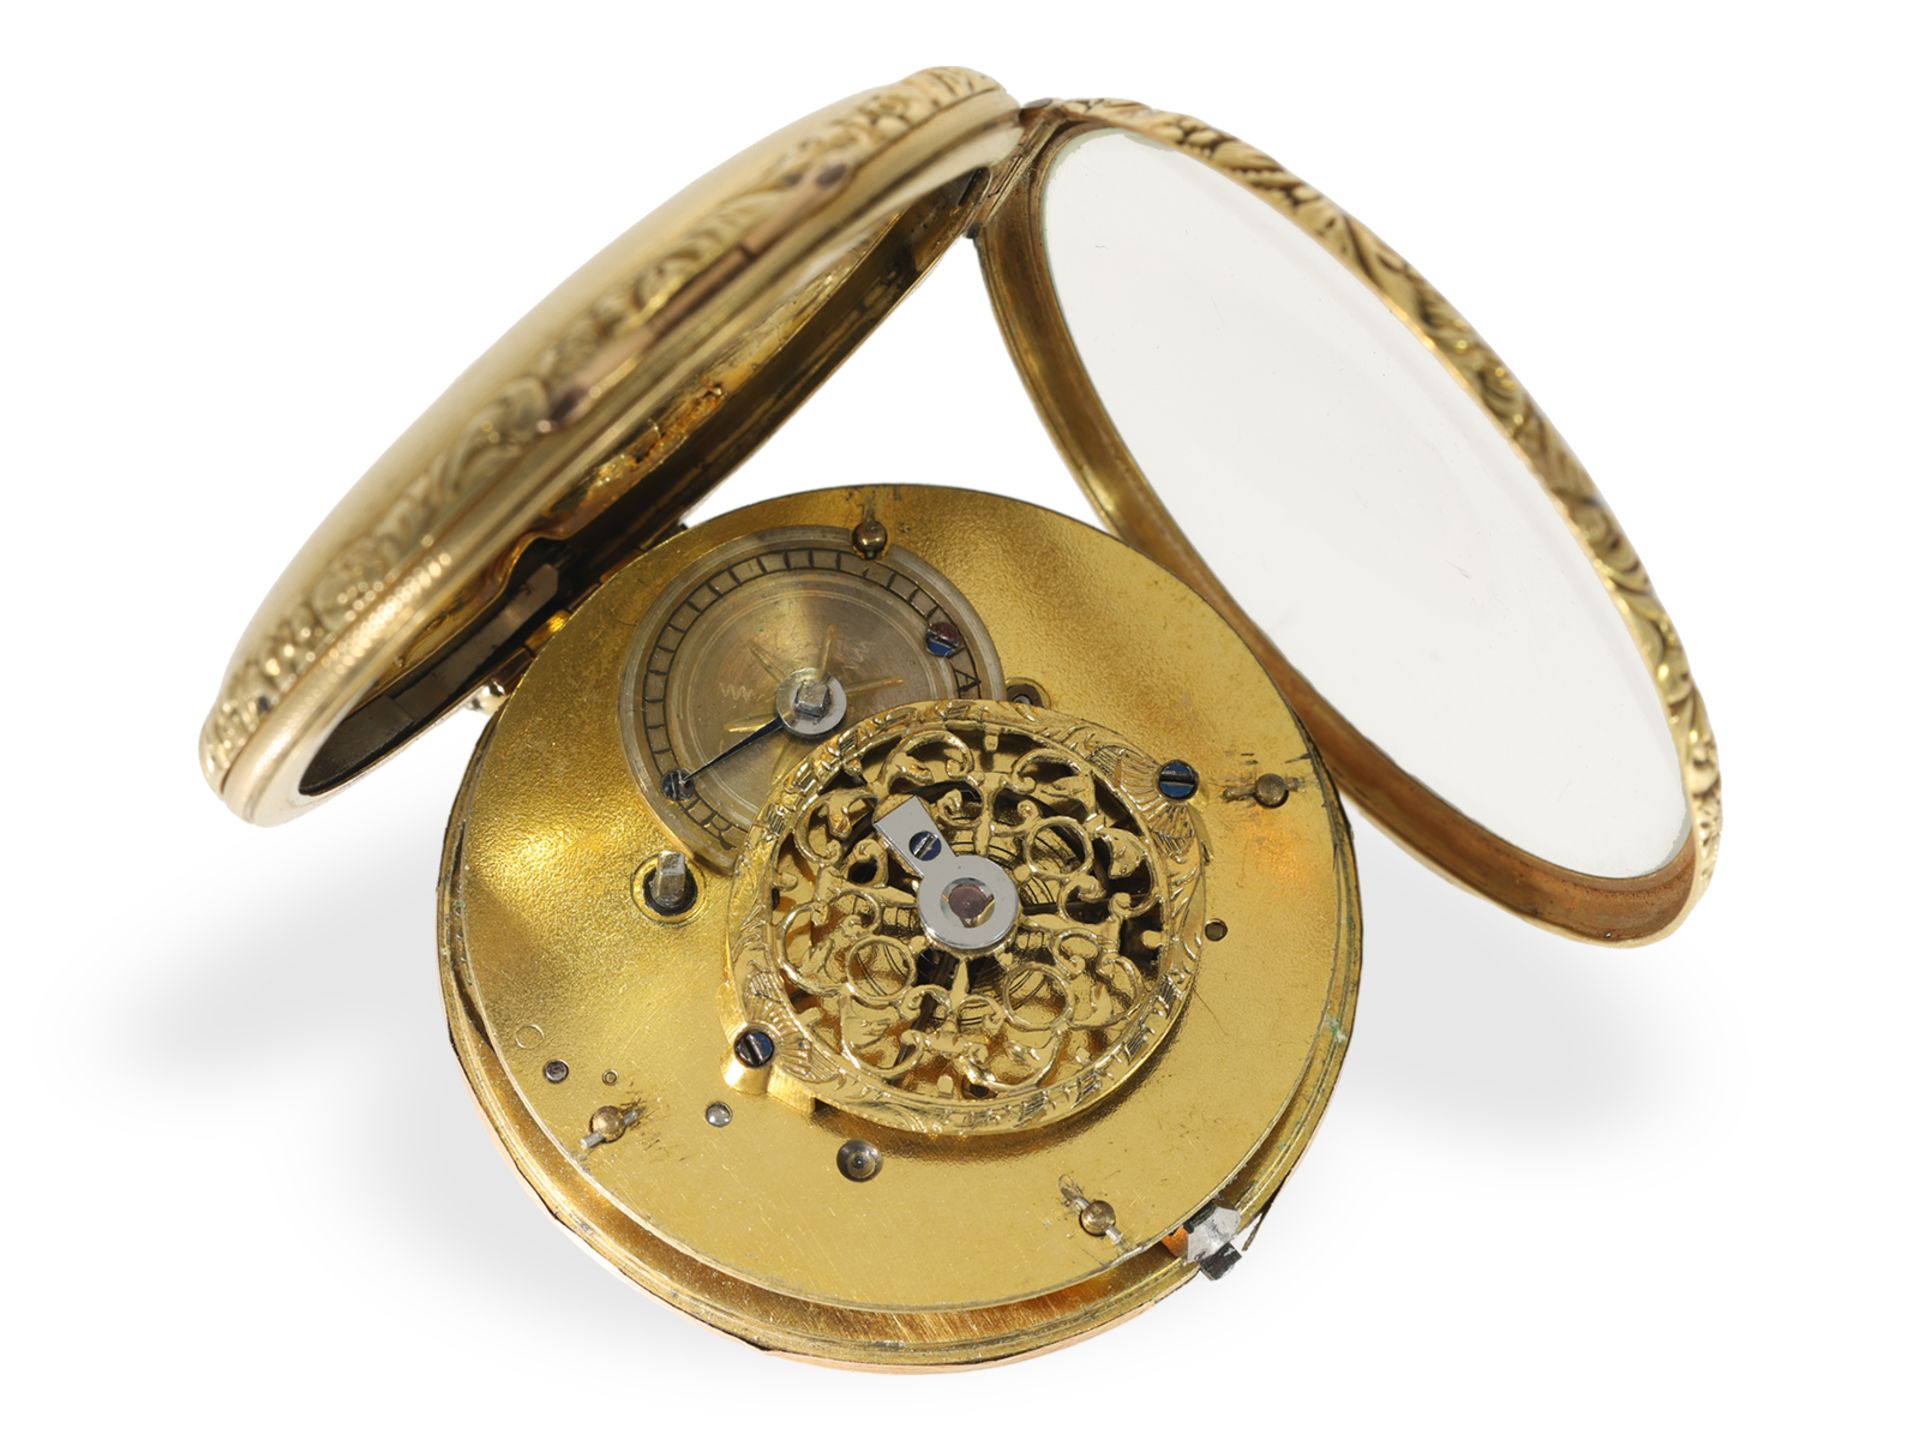 Pocket watch: gold verge watch from around 1830, owned by the Falinskys (manor) - Image 2 of 6